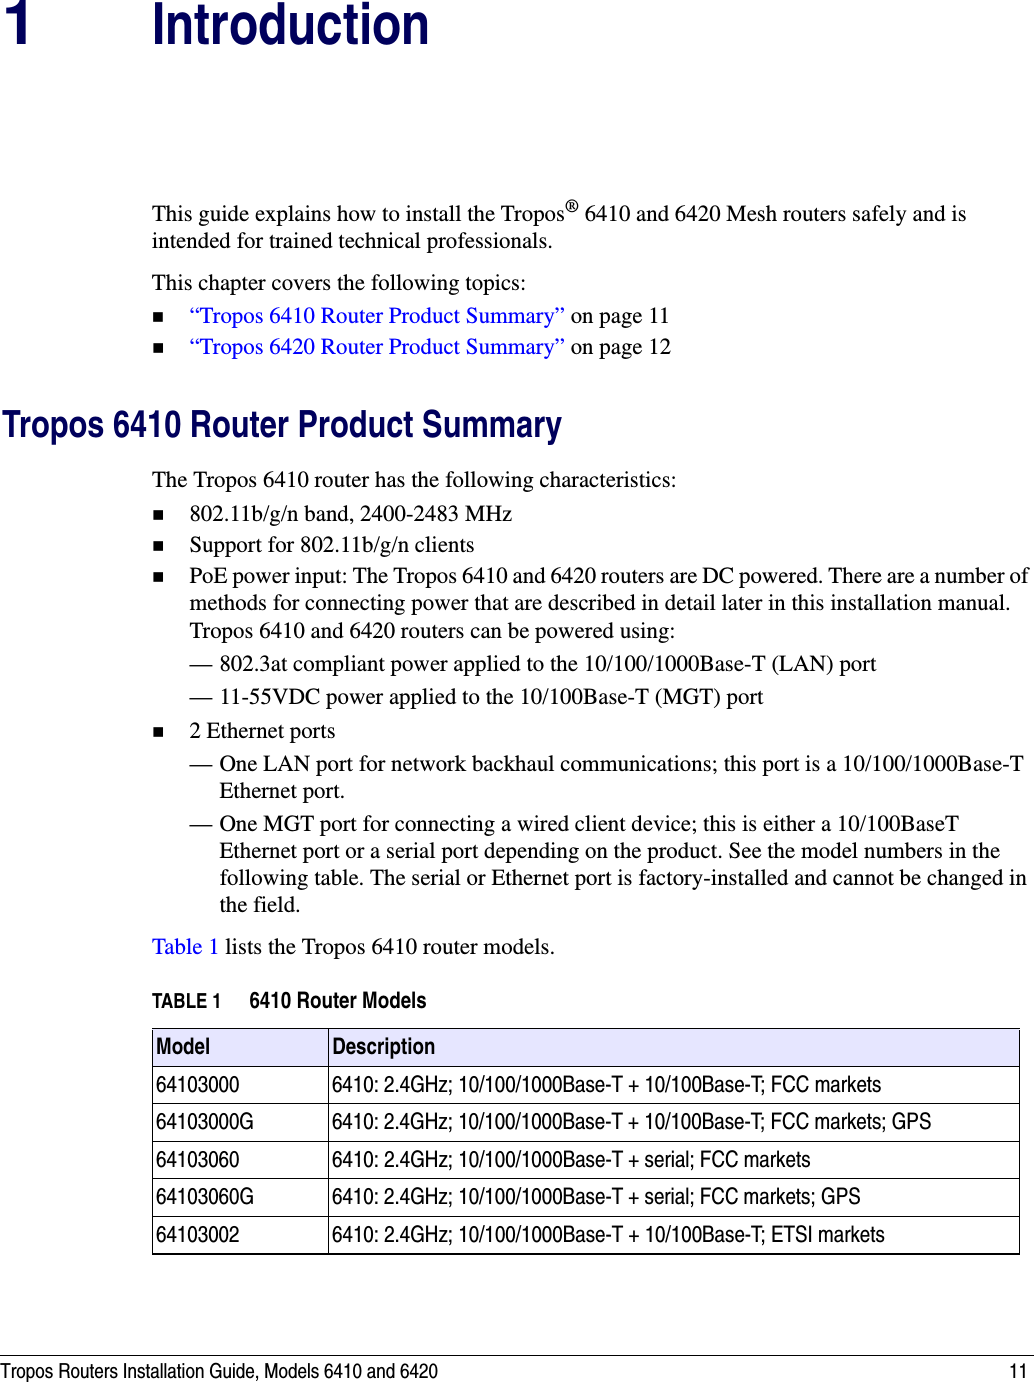 Tropos Routers Installation Guide, Models 6410 and 6420 111IntroductionThis guide explains how to install the Tropos® 6410 and 6420 Mesh routers safely and is intended for trained technical professionals. This chapter covers the following topics:“Tropos 6410 Router Product Summary” on page 11“Tropos 6420 Router Product Summary” on page 12Tropos 6410 Router Product SummaryThe Tropos 6410 router has the following characteristics:802.11b/g/n band, 2400-2483 MHzSupport for 802.11b/g/n clientsPoE power input: The Tropos 6410 and 6420 routers are DC powered. There are a number of methods for connecting power that are described in detail later in this installation manual. Tropos 6410 and 6420 routers can be powered using:— 802.3at compliant power applied to the 10/100/1000Base-T (LAN) port— 11-55VDC power applied to the 10/100Base-T (MGT) port2 Ethernet ports— One LAN port for network backhaul communications; this port is a 10/100/1000Base-T Ethernet port.— One MGT port for connecting a wired client device; this is either a 10/100BaseT Ethernet port or a serial port depending on the product. See the model numbers in the following table. The serial or Ethernet port is factory-installed and cannot be changed in the field.Table 1 lists the Tropos 6410 router models.TABLE 1 6410 Router ModelsModel  Description64103000 6410: 2.4GHz; 10/100/1000Base-T + 10/100Base-T; FCC markets64103000G 6410: 2.4GHz; 10/100/1000Base-T + 10/100Base-T; FCC markets; GPS64103060 6410: 2.4GHz; 10/100/1000Base-T + serial; FCC markets64103060G 6410: 2.4GHz; 10/100/1000Base-T + serial; FCC markets; GPS64103002 6410: 2.4GHz; 10/100/1000Base-T + 10/100Base-T; ETSI markets